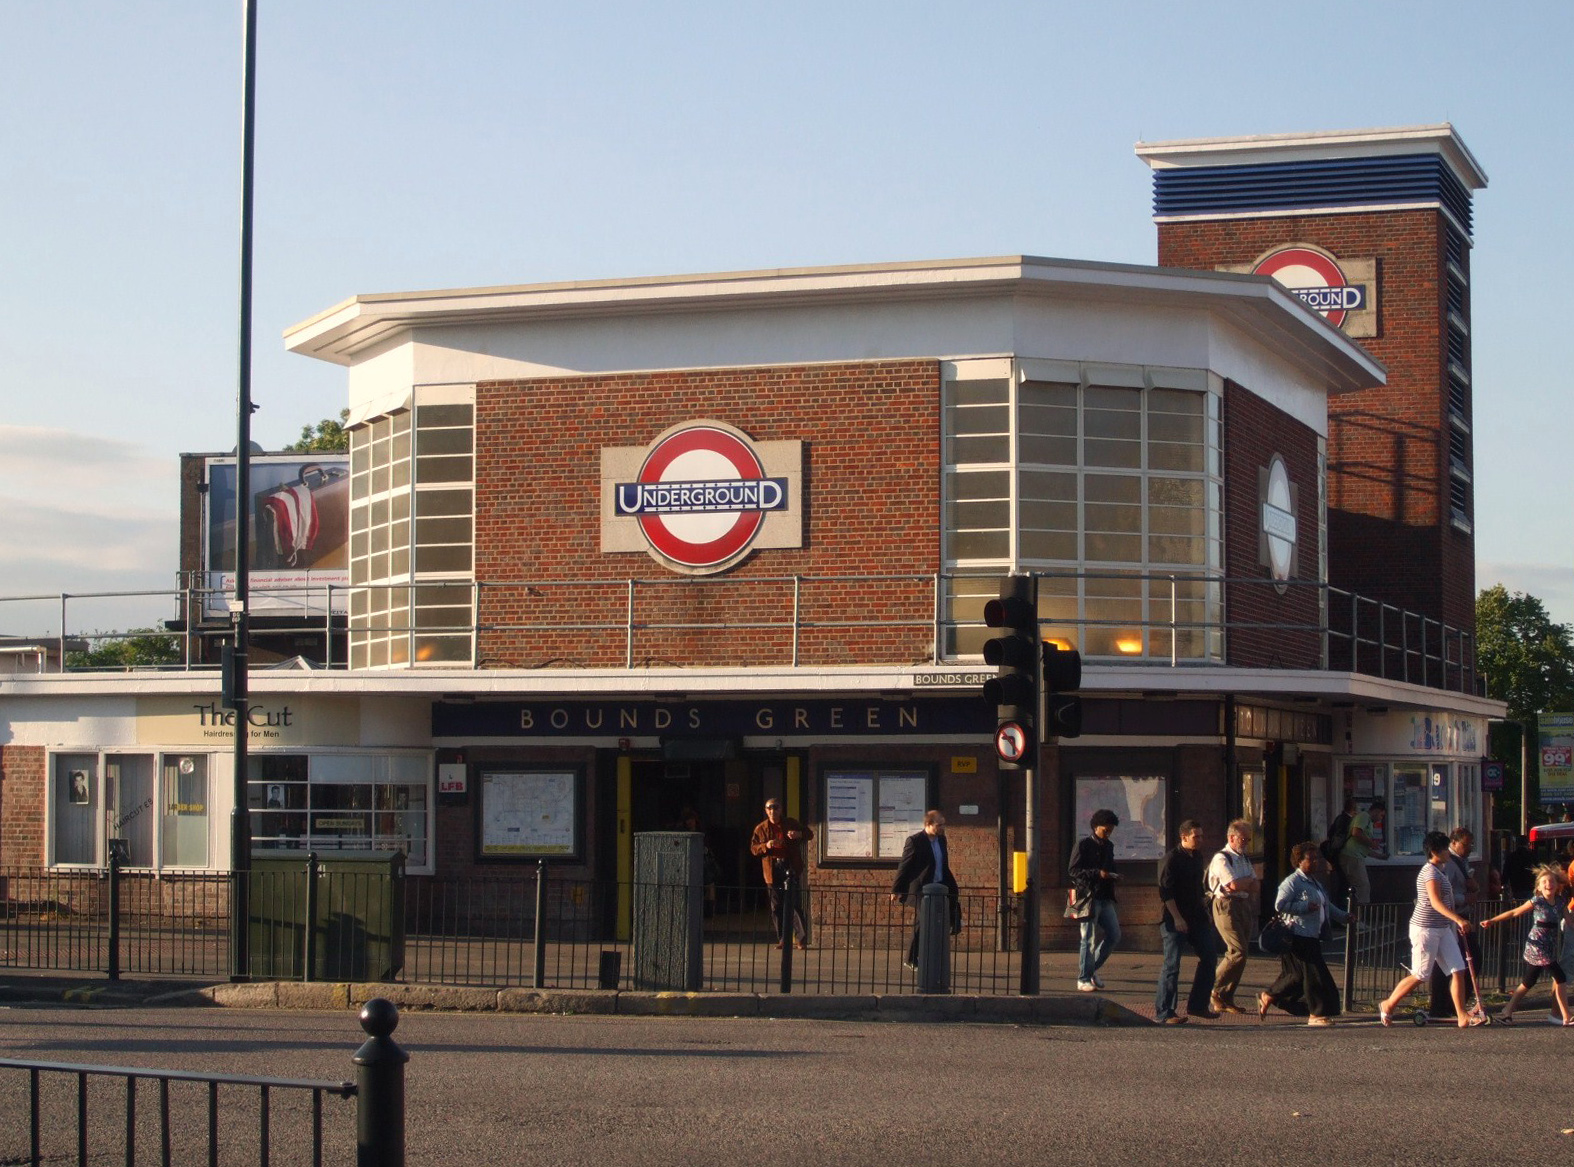 Bounds Green Entrance